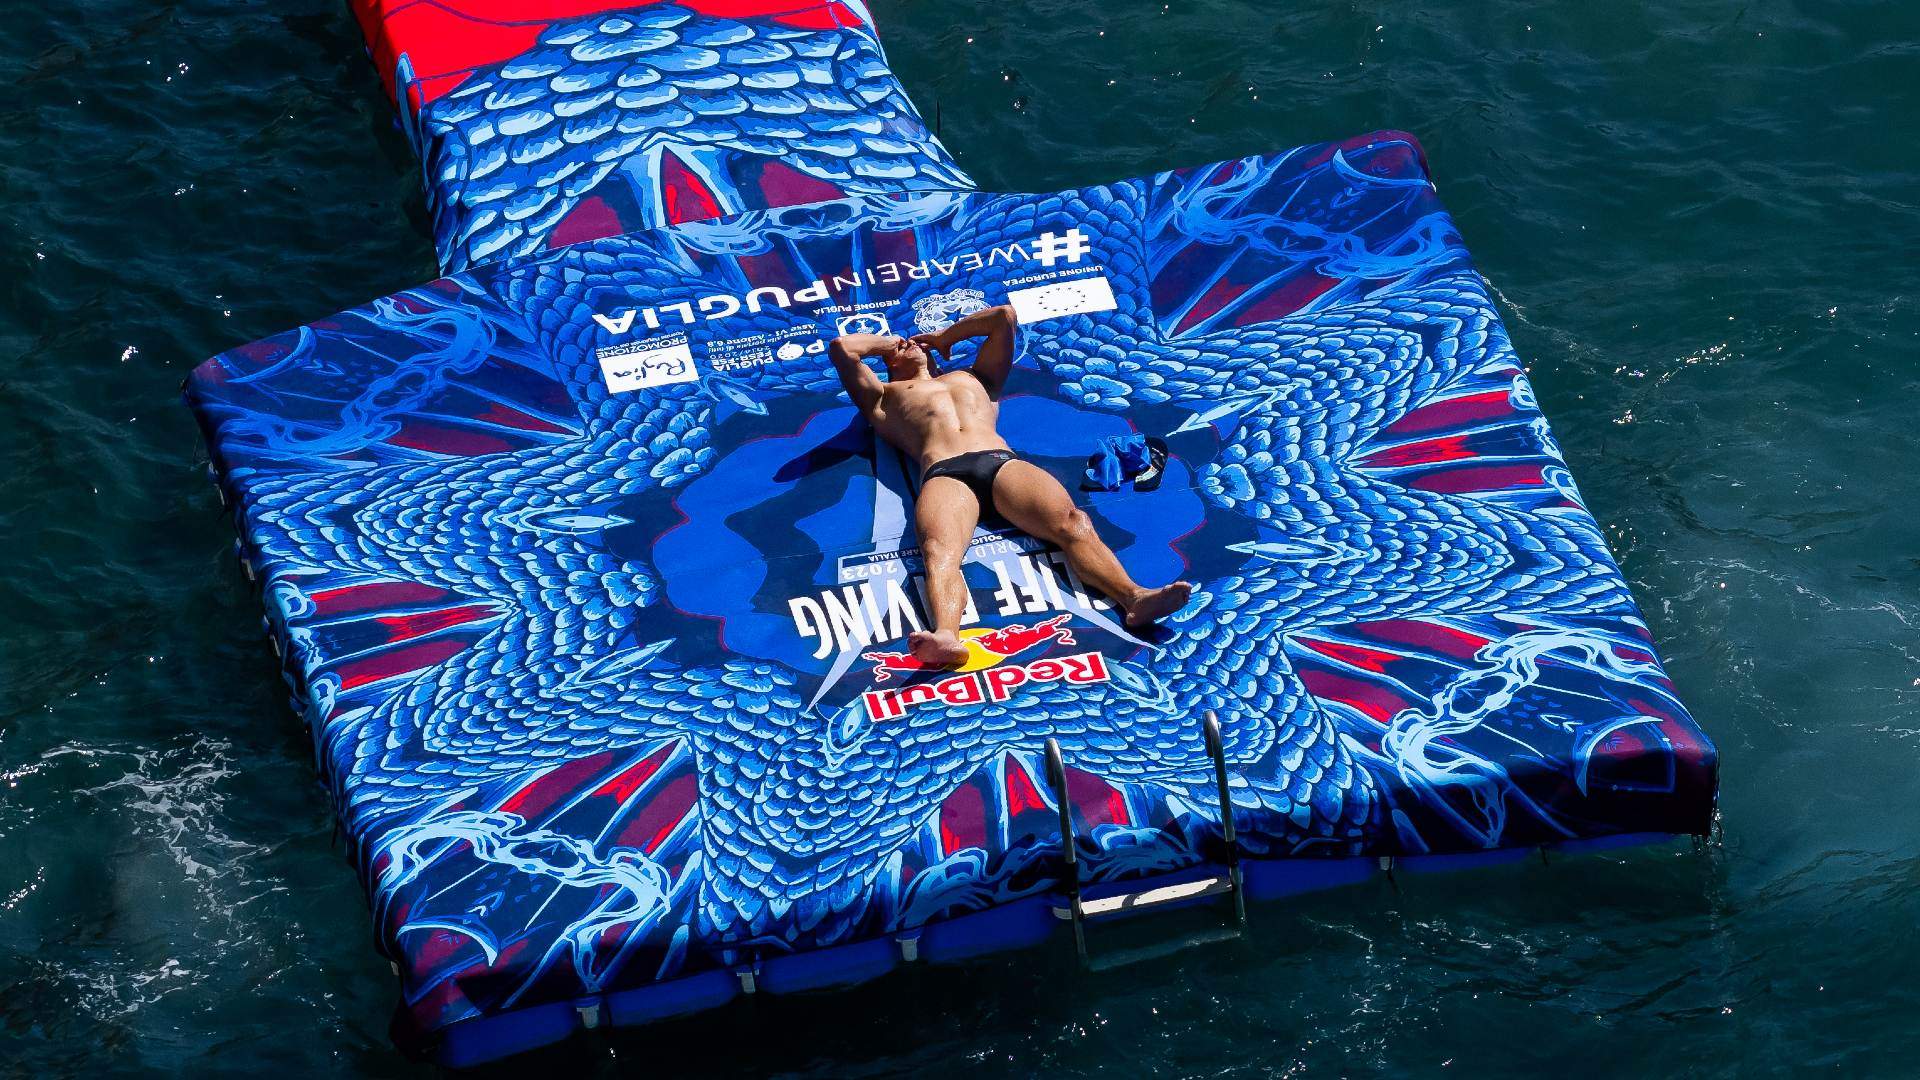 The Red Bull Cliff Diving World Series Is Splashing Into New Zealand for the First Time in November